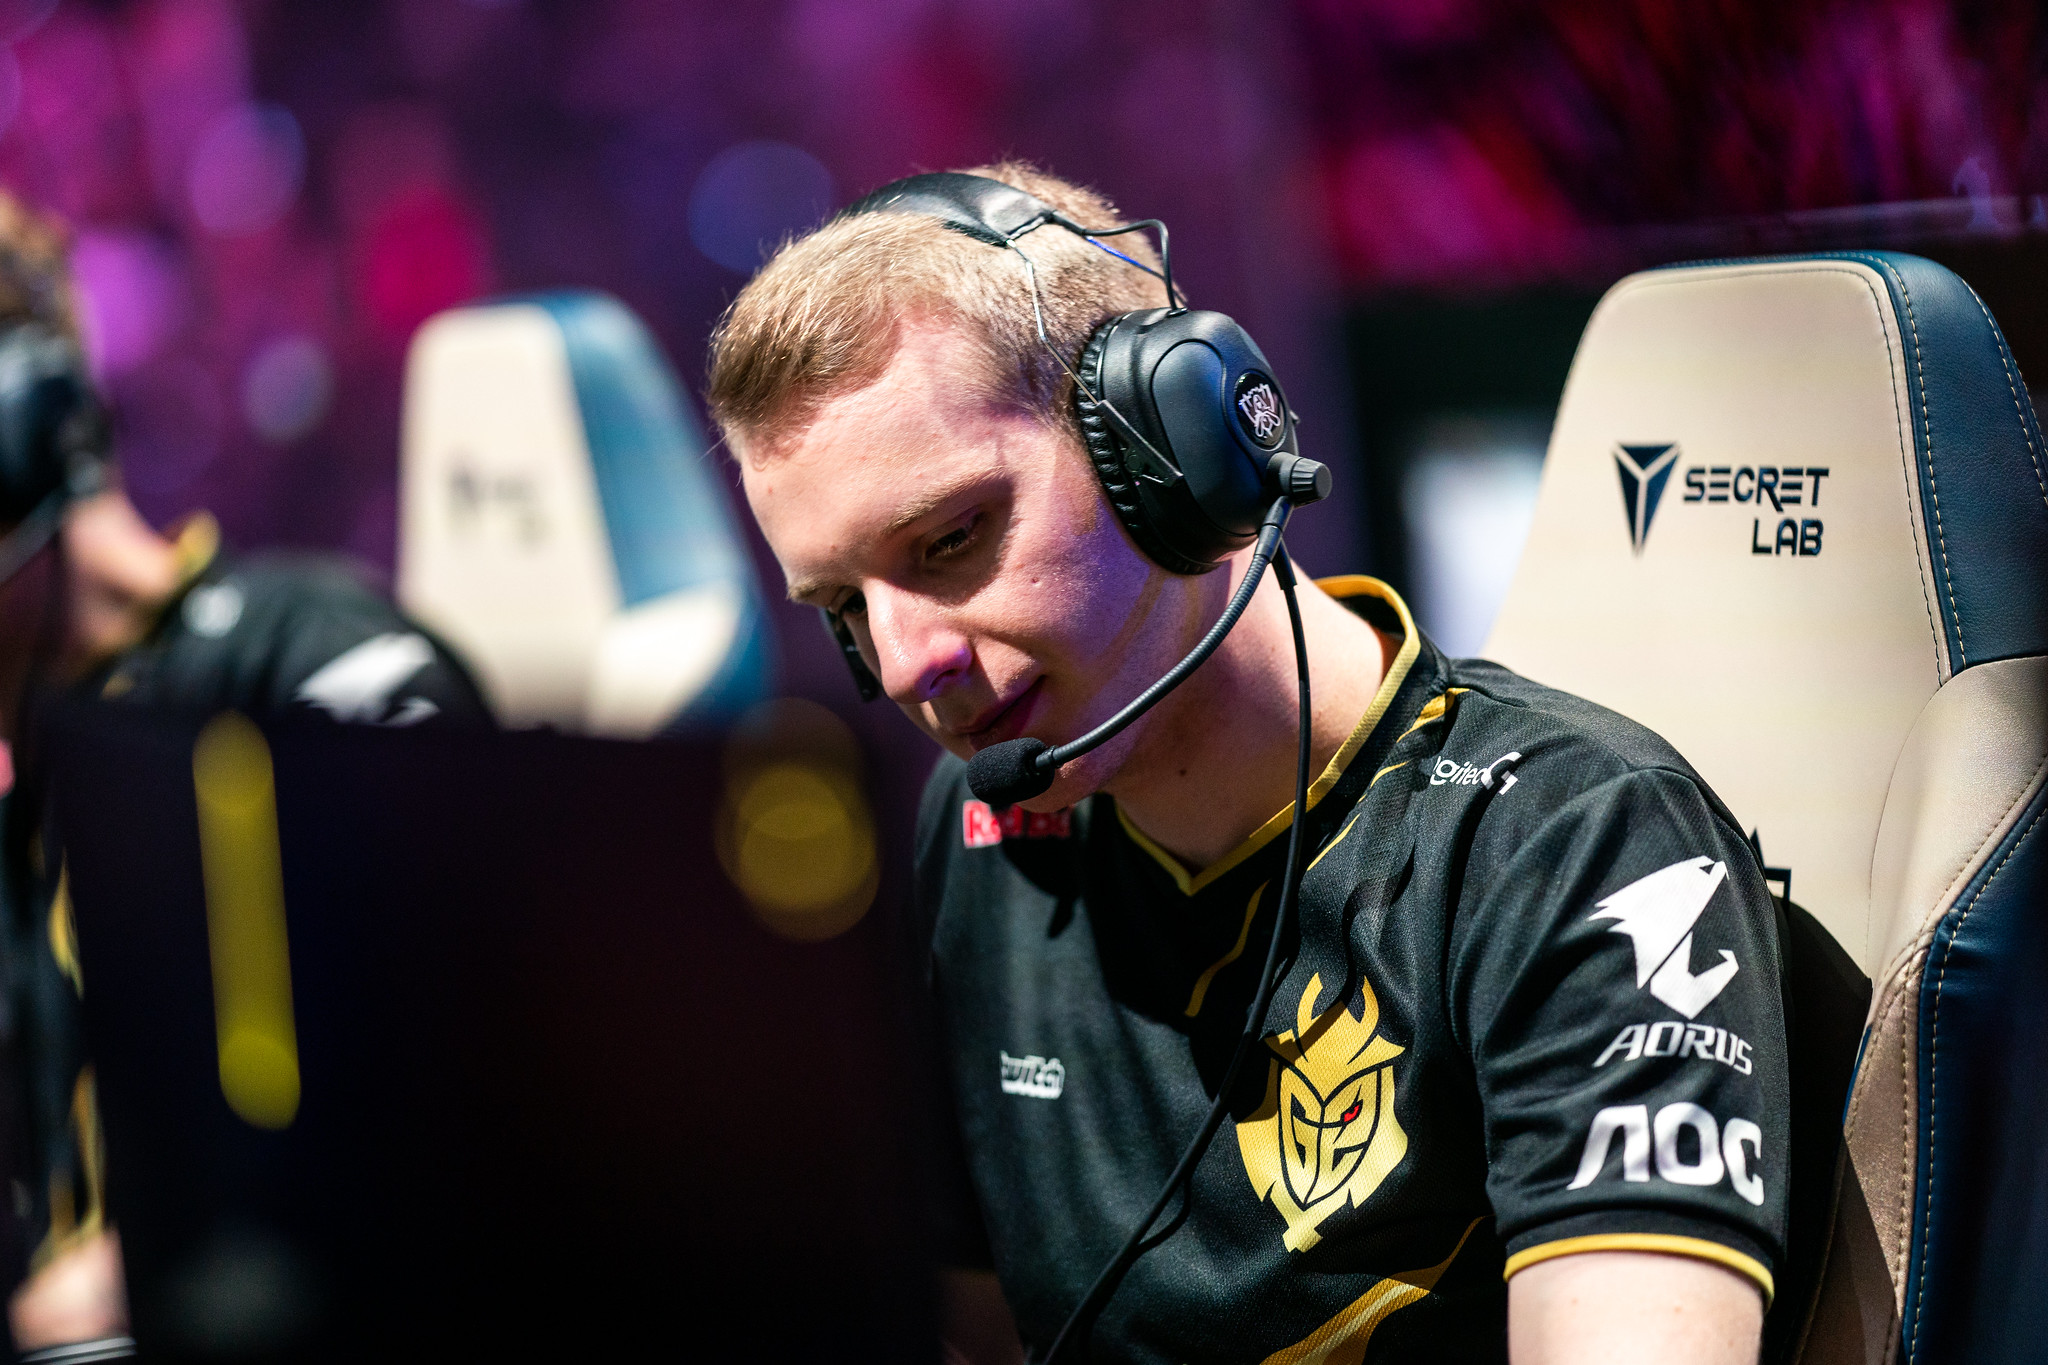 jankos reveals his thoughts on worlds 2019, says